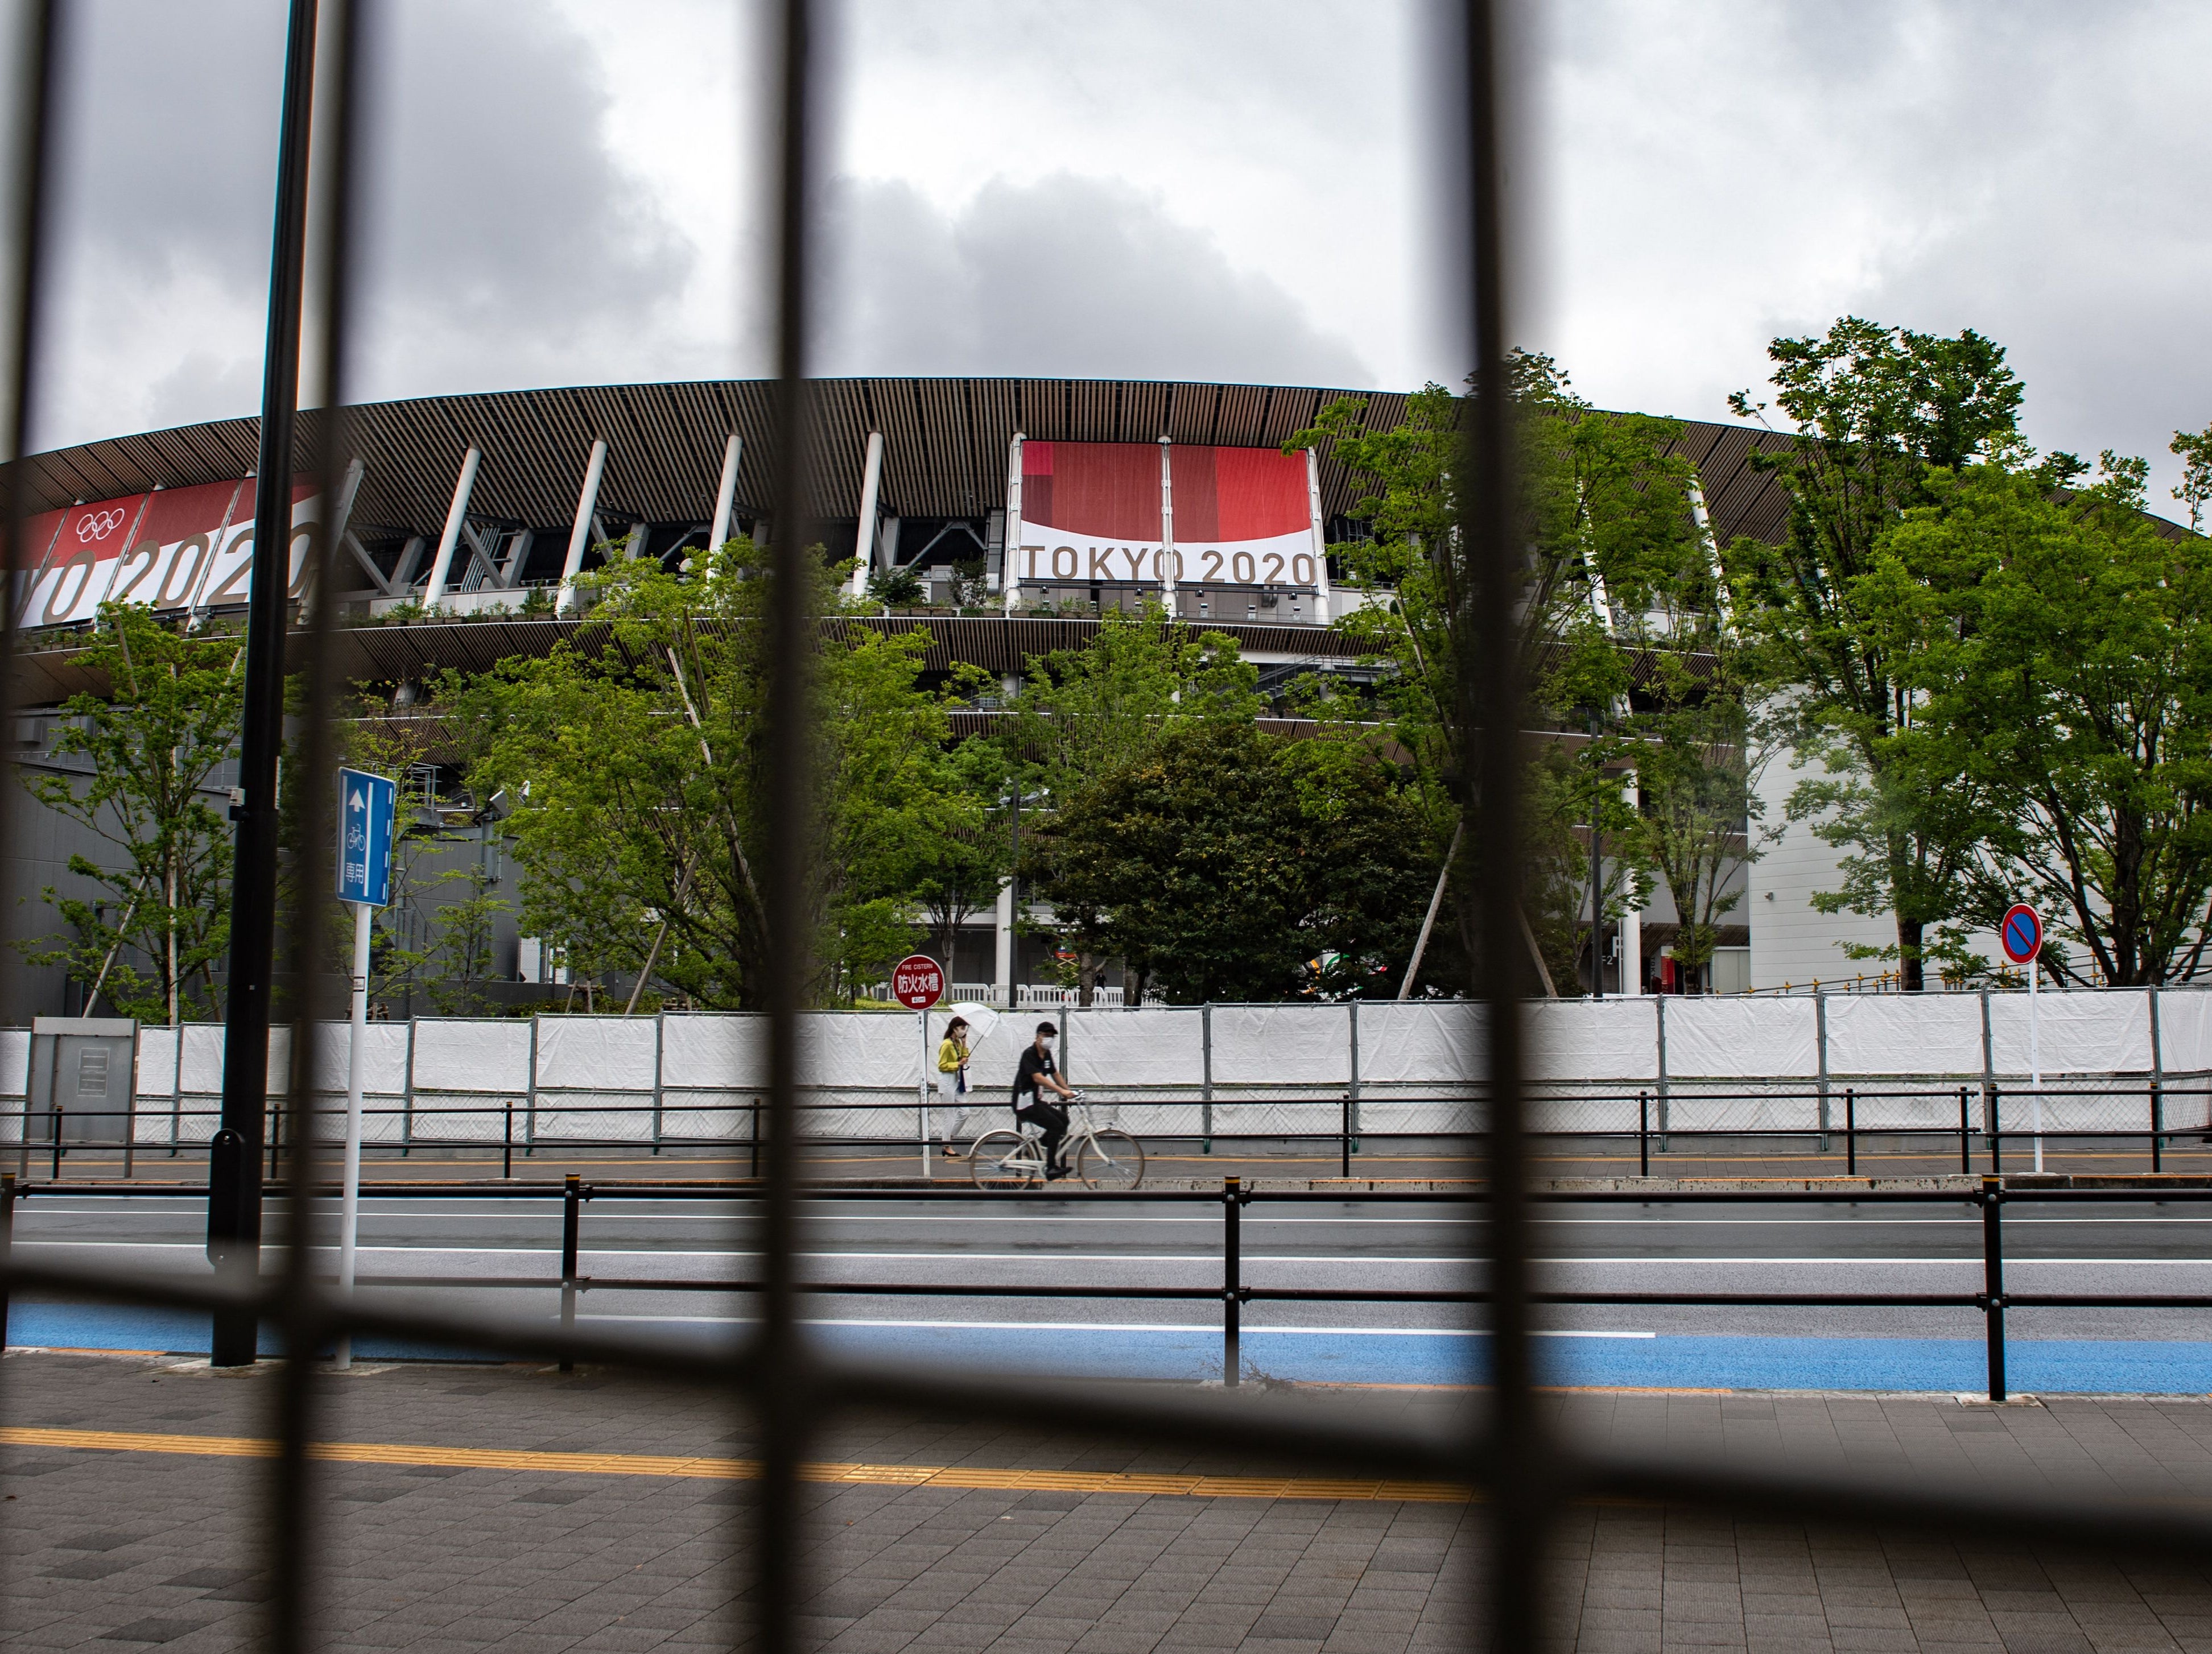 The National Stadium, main venue for the Tokyo 2020 Olympic and Paralympic Games